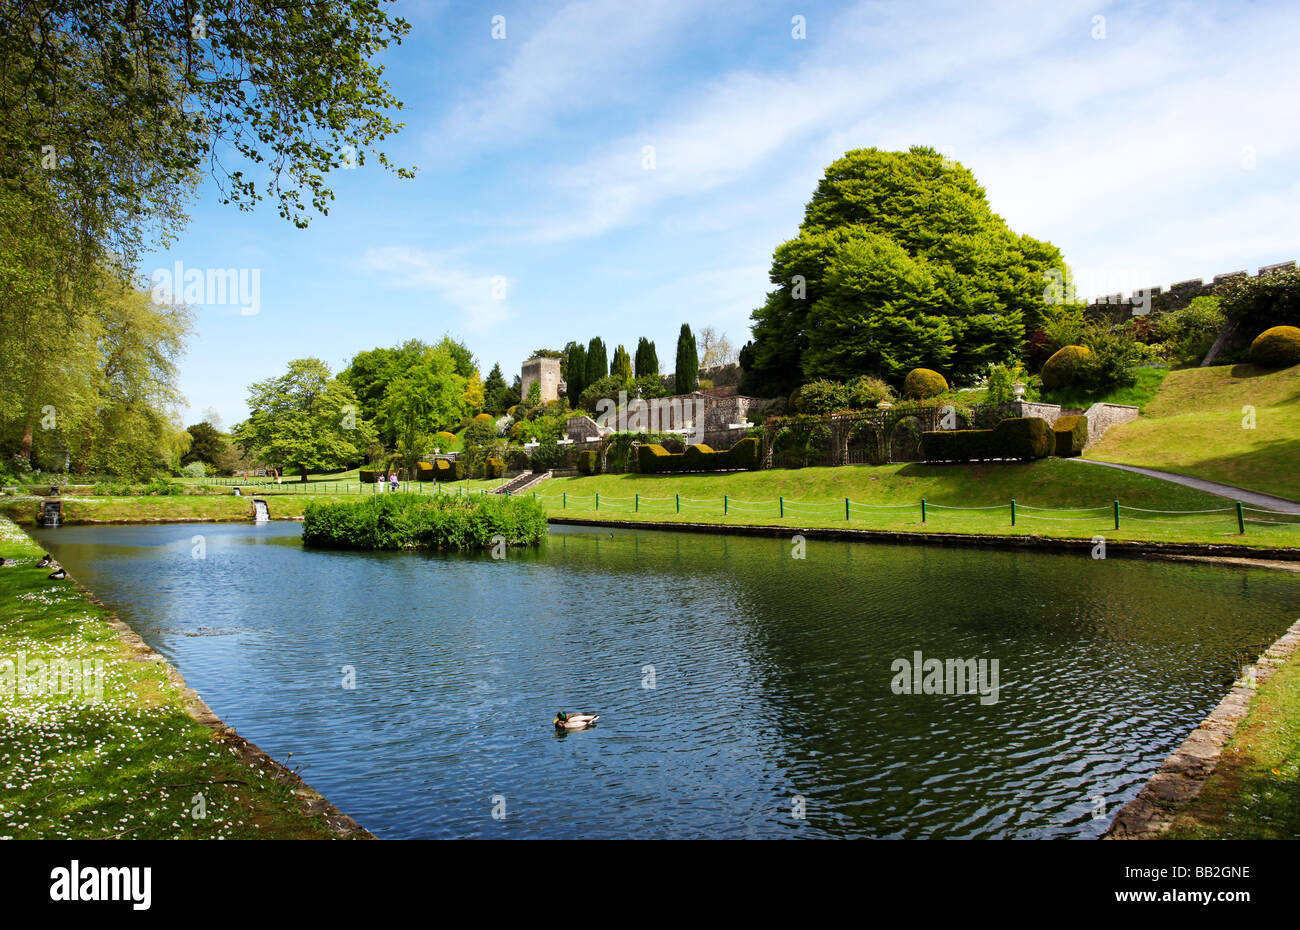 Stunning grounds and lakes of St Fagans Castle at St Fagans open air National History Museum of Welsh life near Cardiff Wales UK Stock Photo